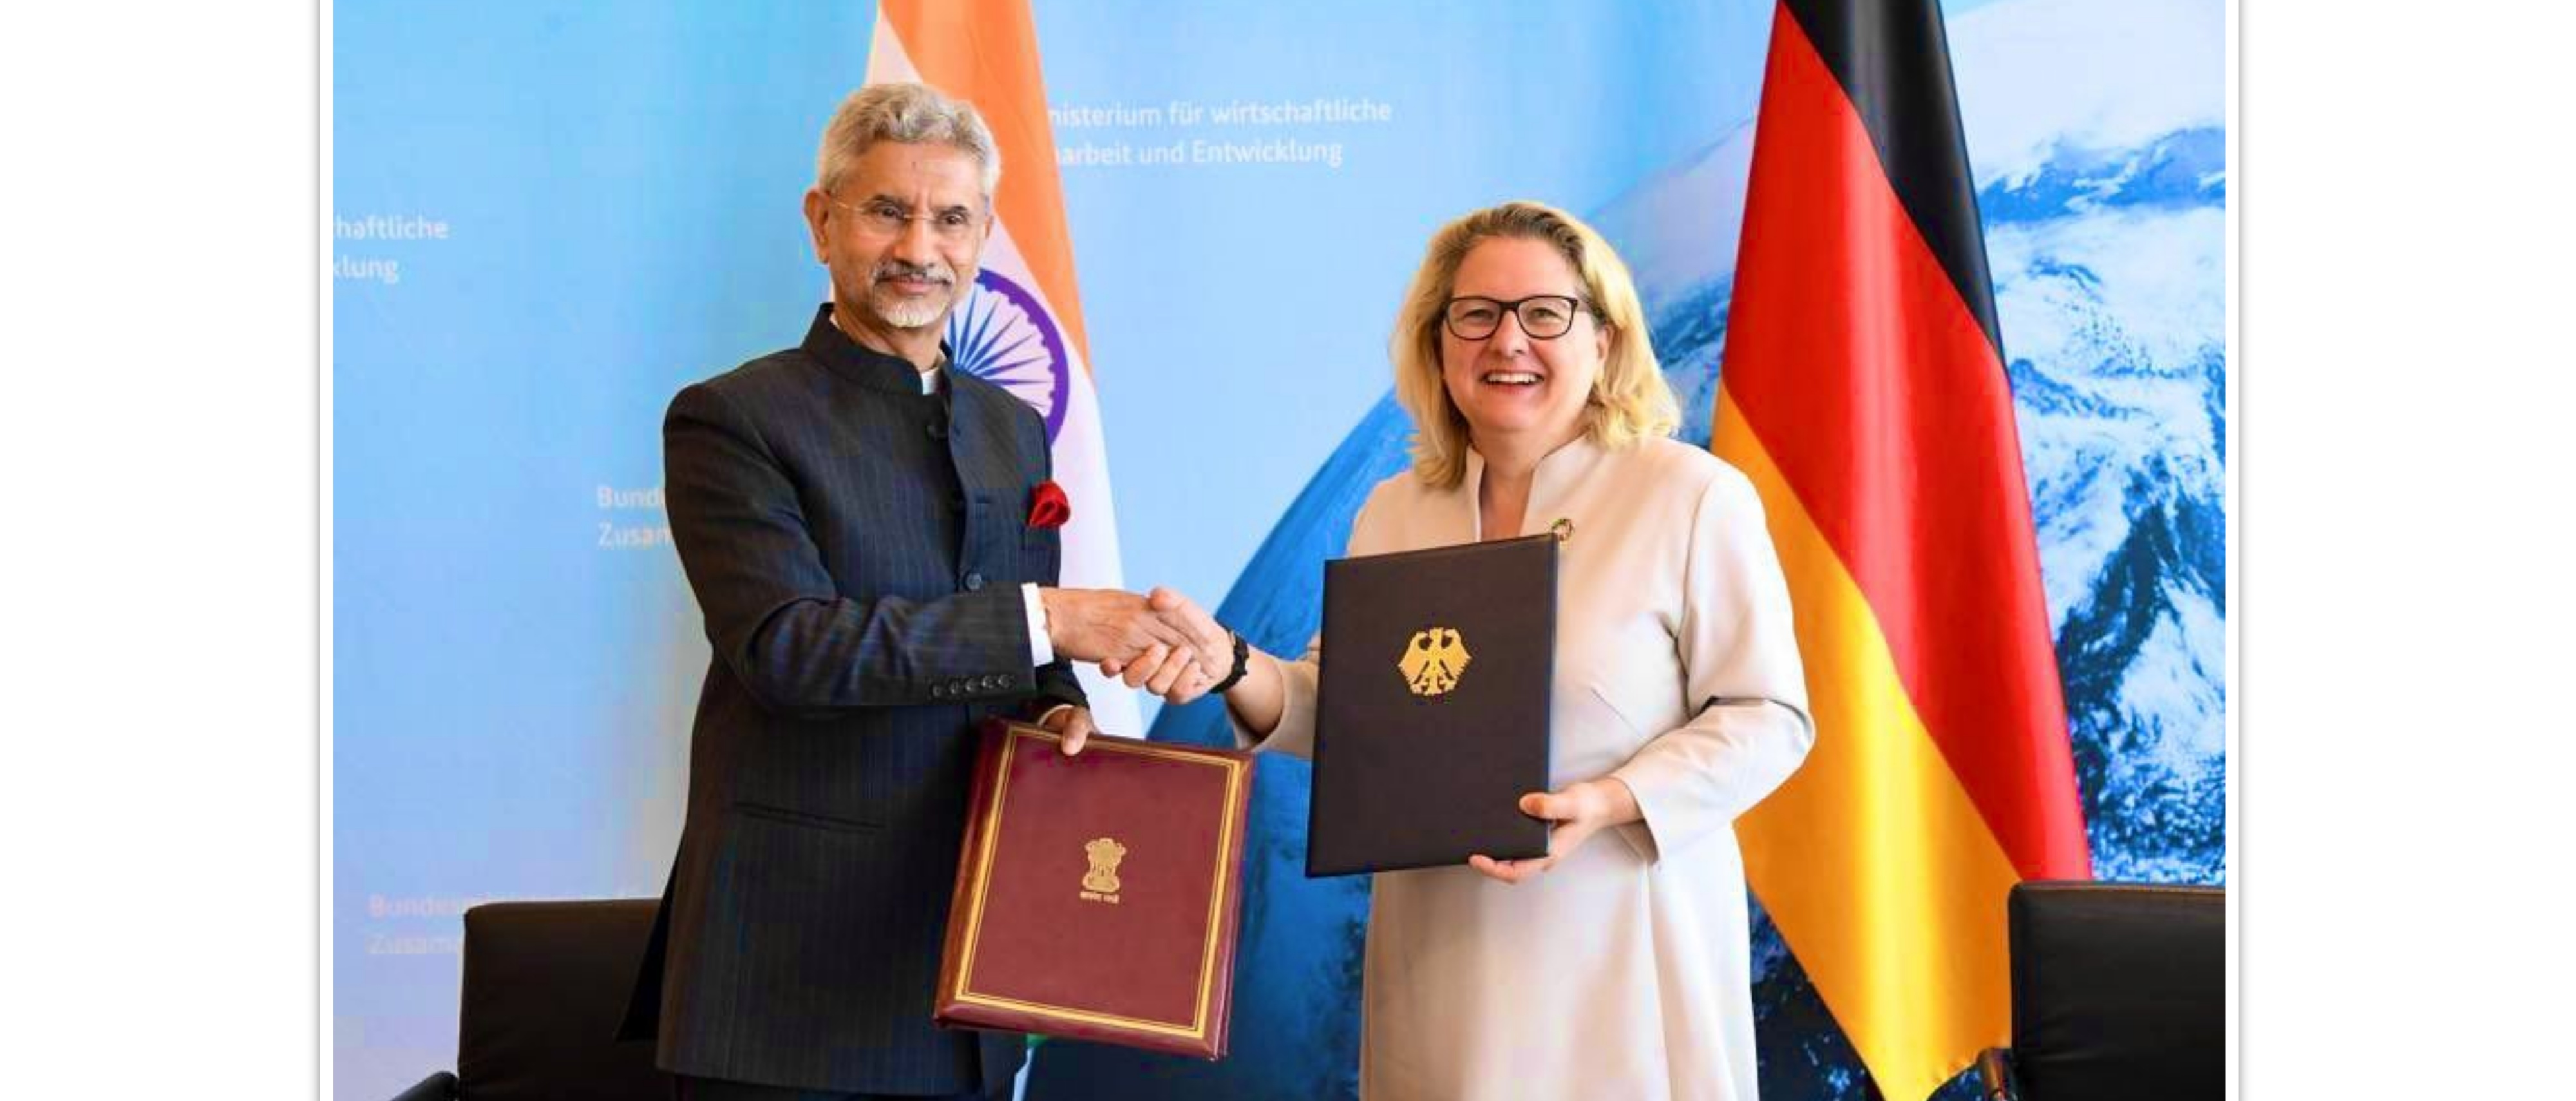  External Affairs Minister Dr. S. Jaishankar with German Minister for Economic Development and Cooperation MdB Svenja Schulze at the 6th India-Germany Inter-Governmental Consultations 